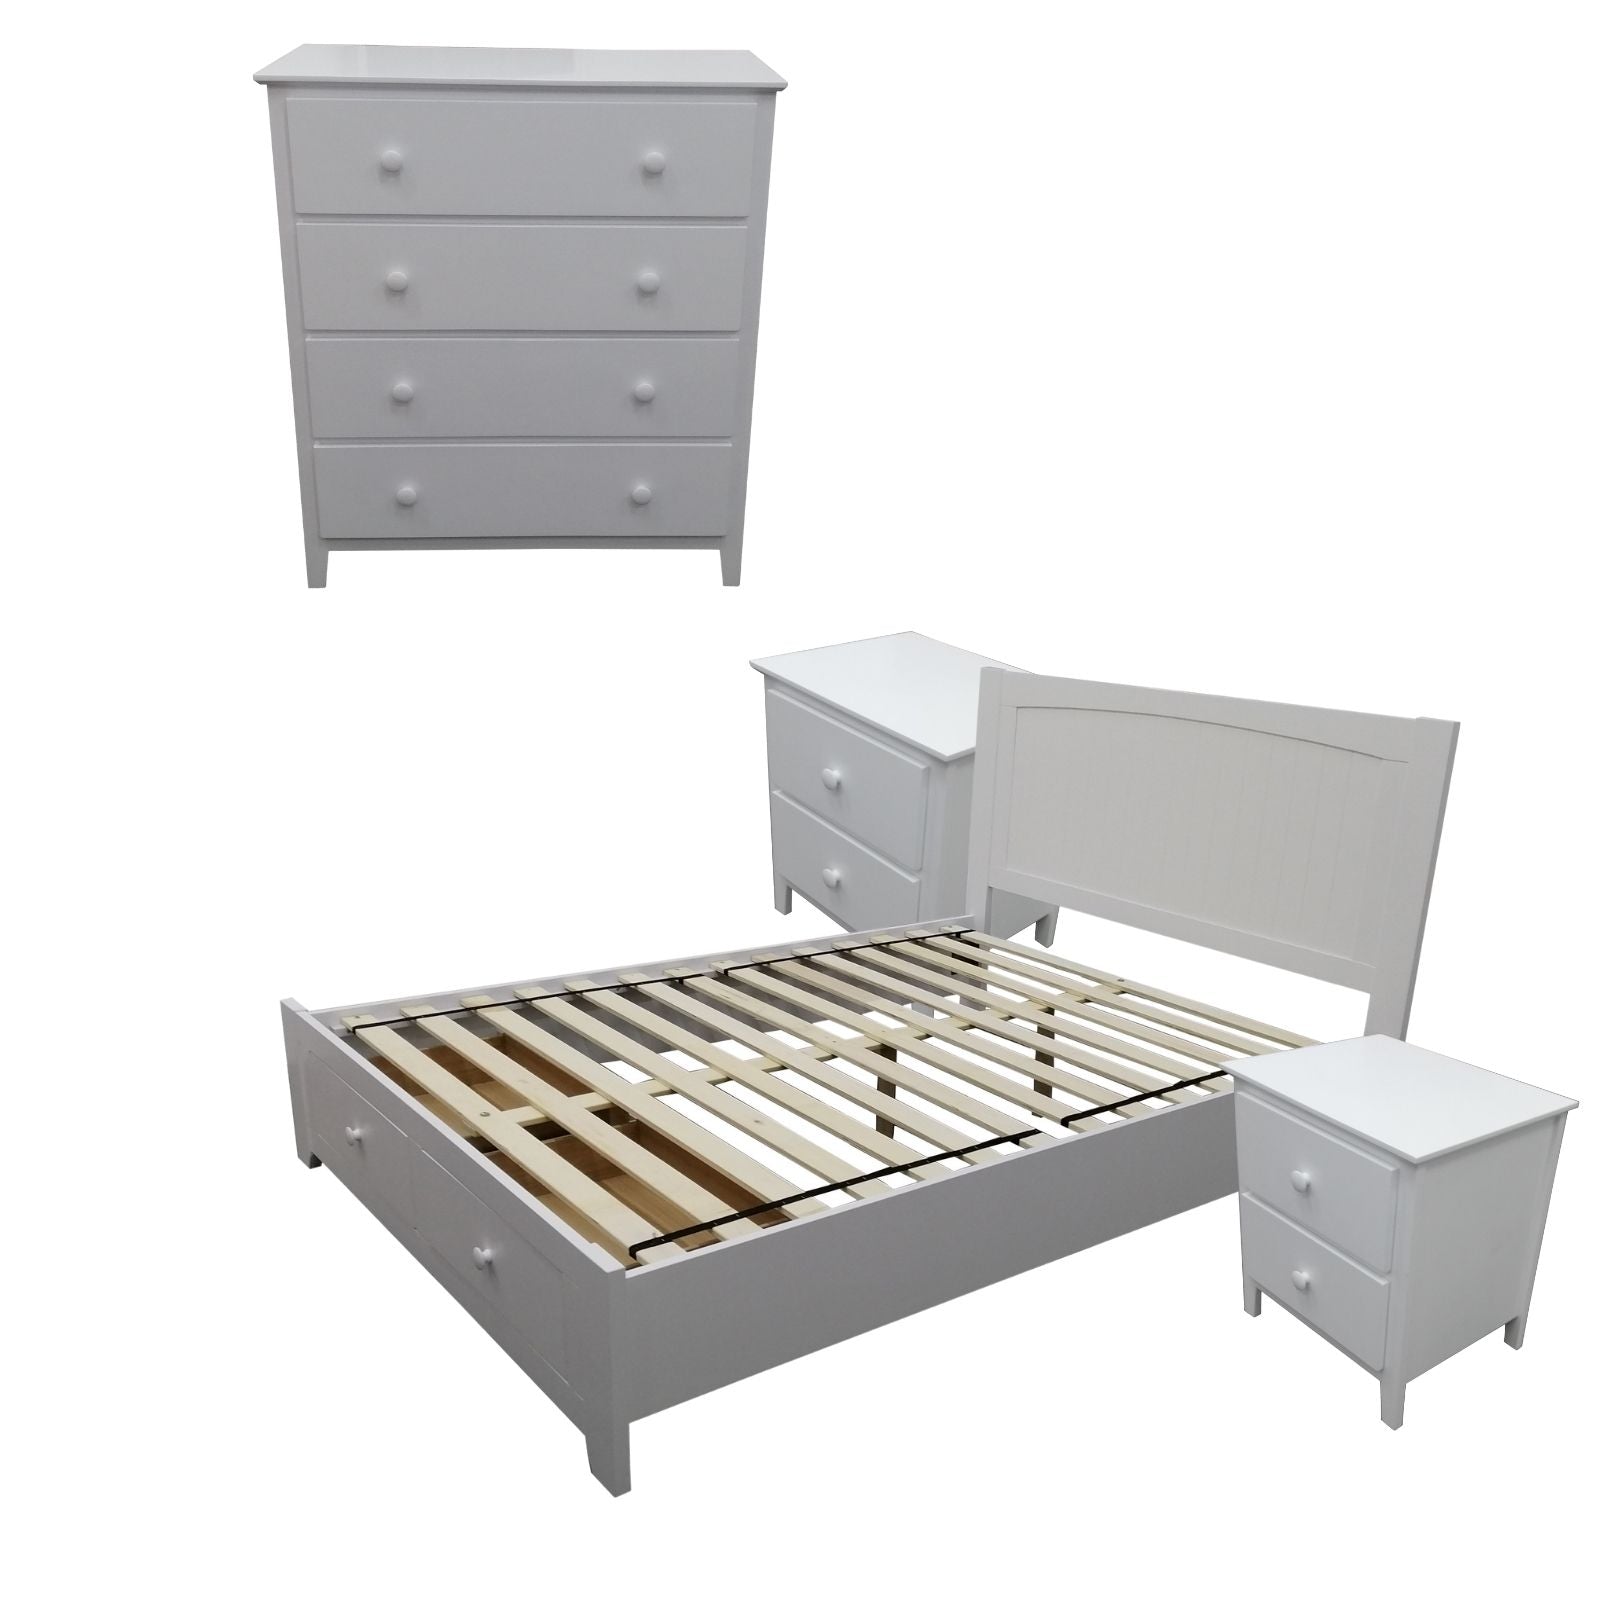 Out of Stock! No Assembly Required! Queen Size Bedroom Furniture Package Bedside Tables Tallboy Set - WHT